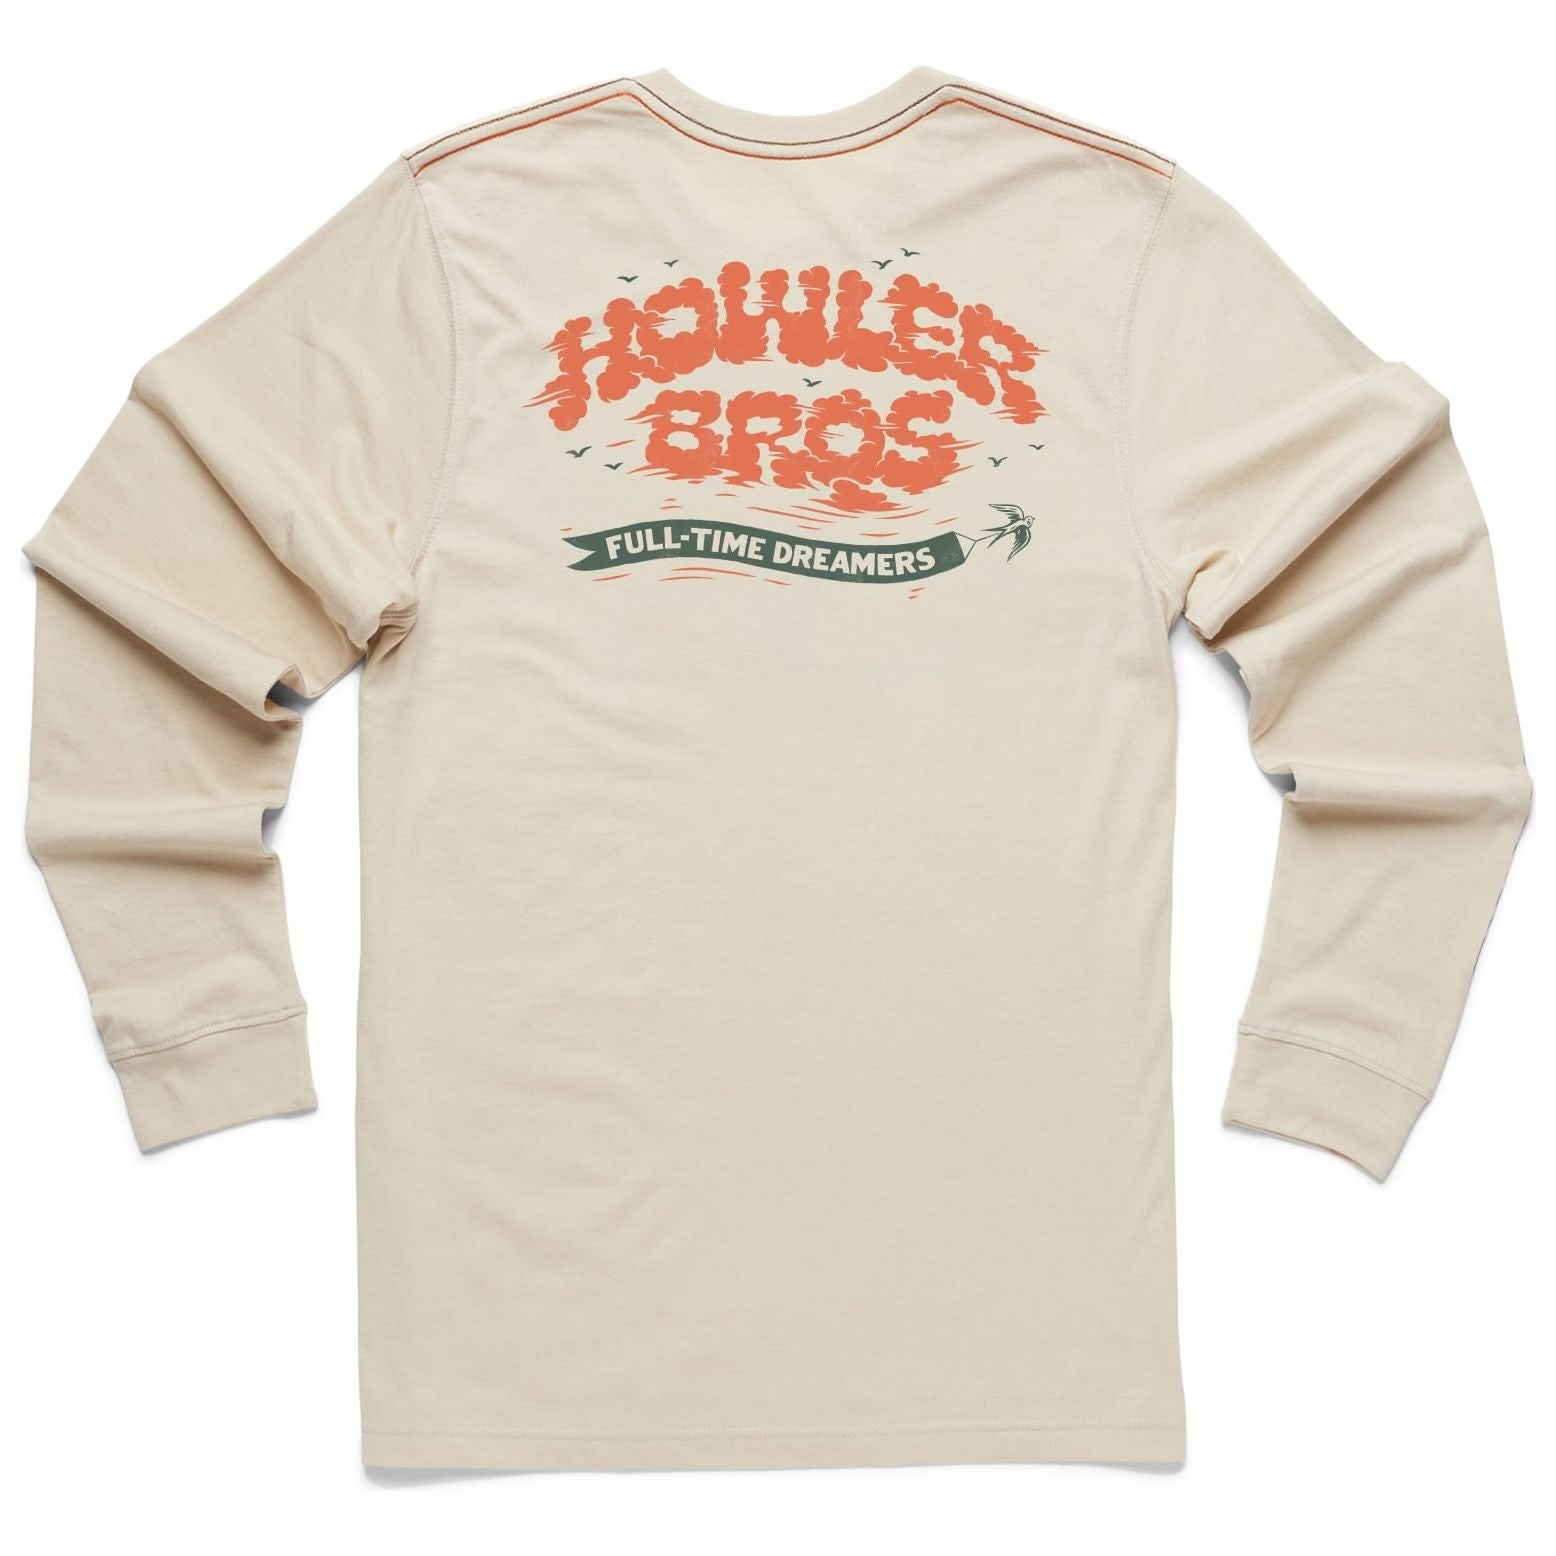 Howler Brothers Select Longsleeve T Full Time Dreamers: Sand Heather Image 1